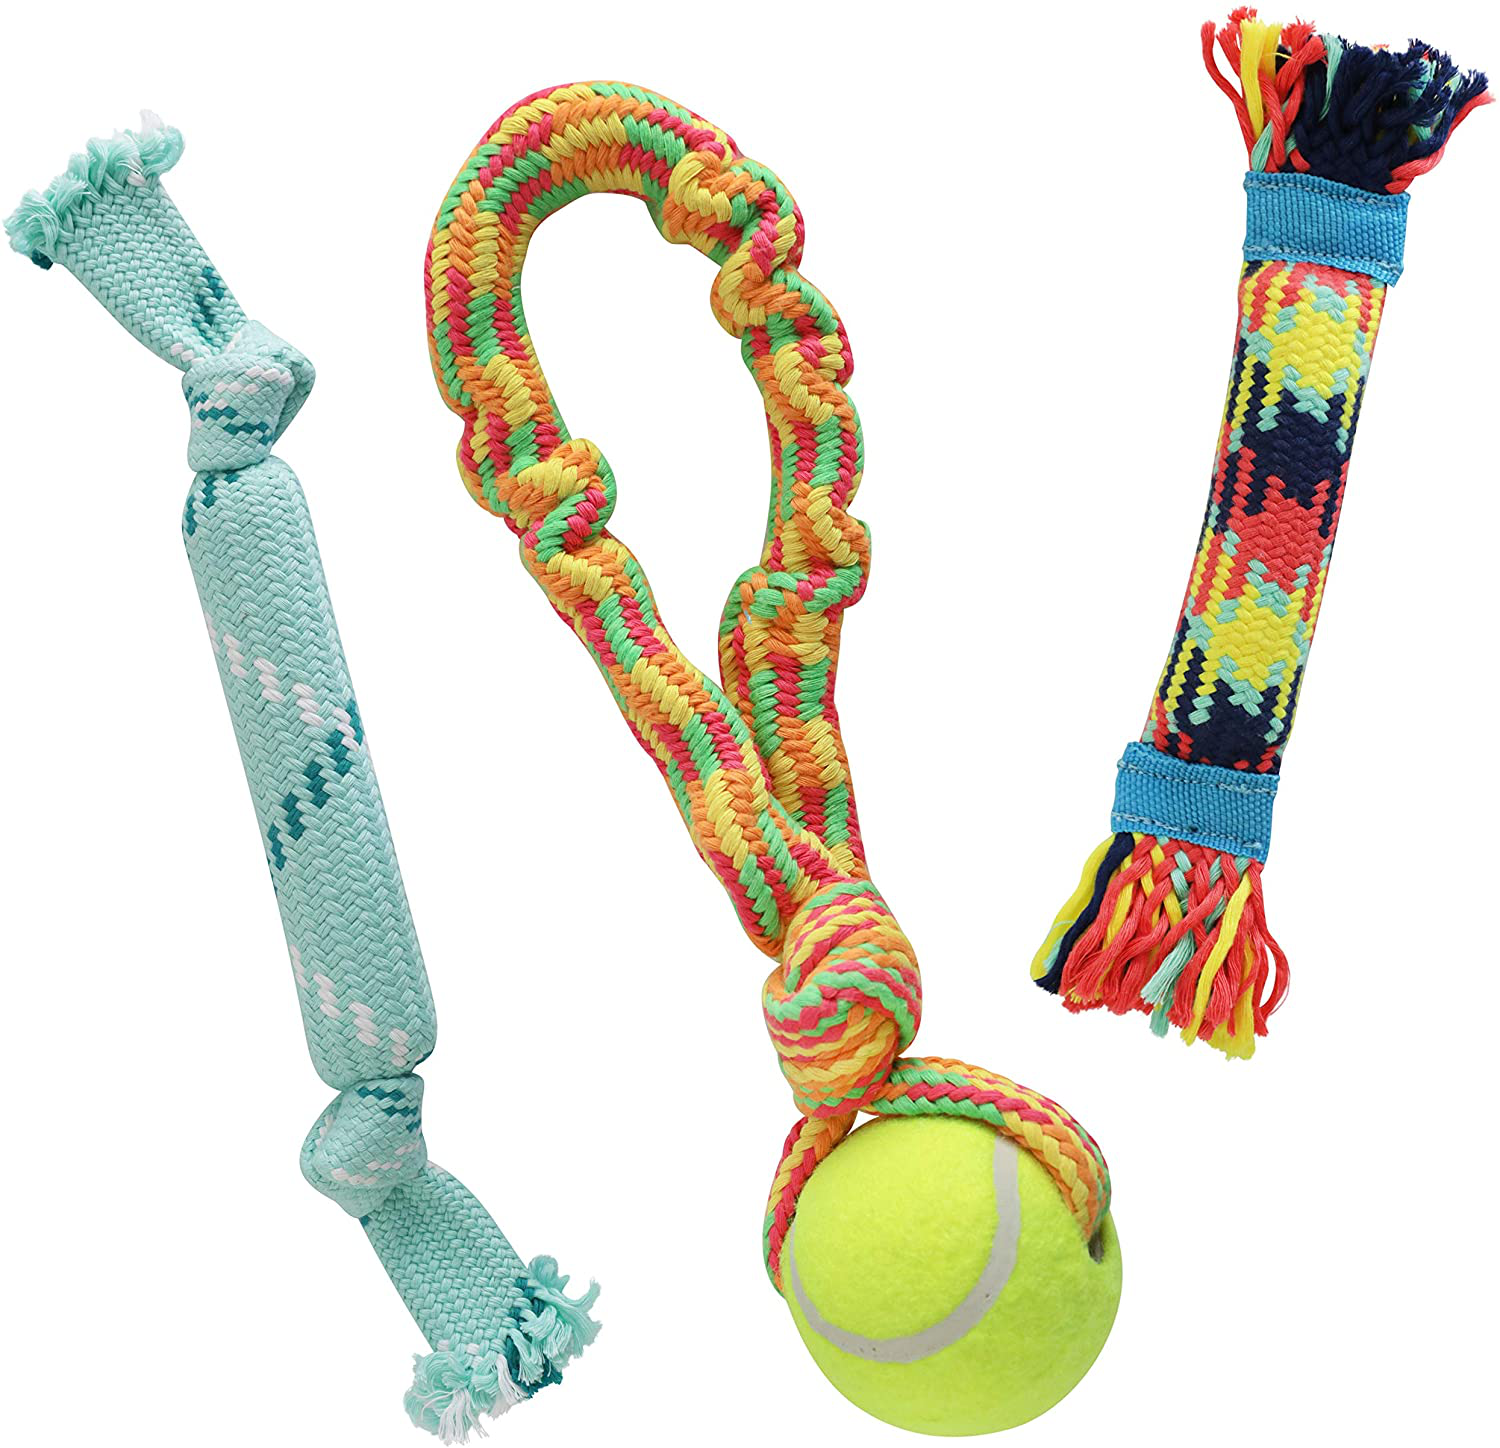 Rocket & Rex Dog Toy Pack, Chew Toys for Small Dogs and Dog Toys for Puppies, Safe & Non-Toxic, for Small to Medium Breeds, Includes Rope Toys, Plush Squeaky Toy, Ball and Tug of War Toy Animals & Pet Supplies > Pet Supplies > Dog Supplies > Dog Toys rocket & rex Rope + Tennis Tug Toy Set  